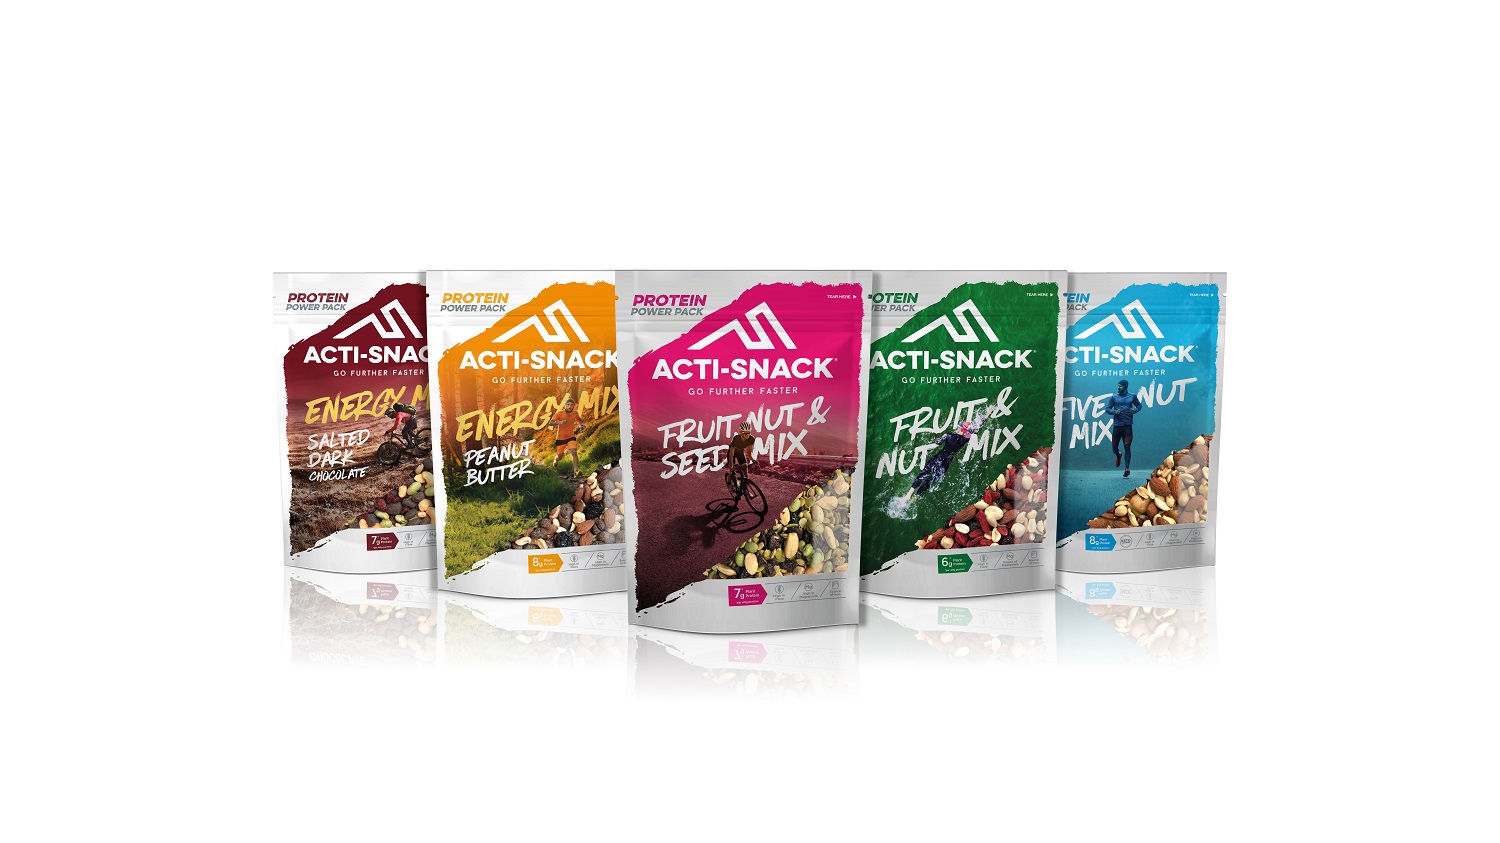 ACTI-SNACK launches the next generation of sports nutrition snacks